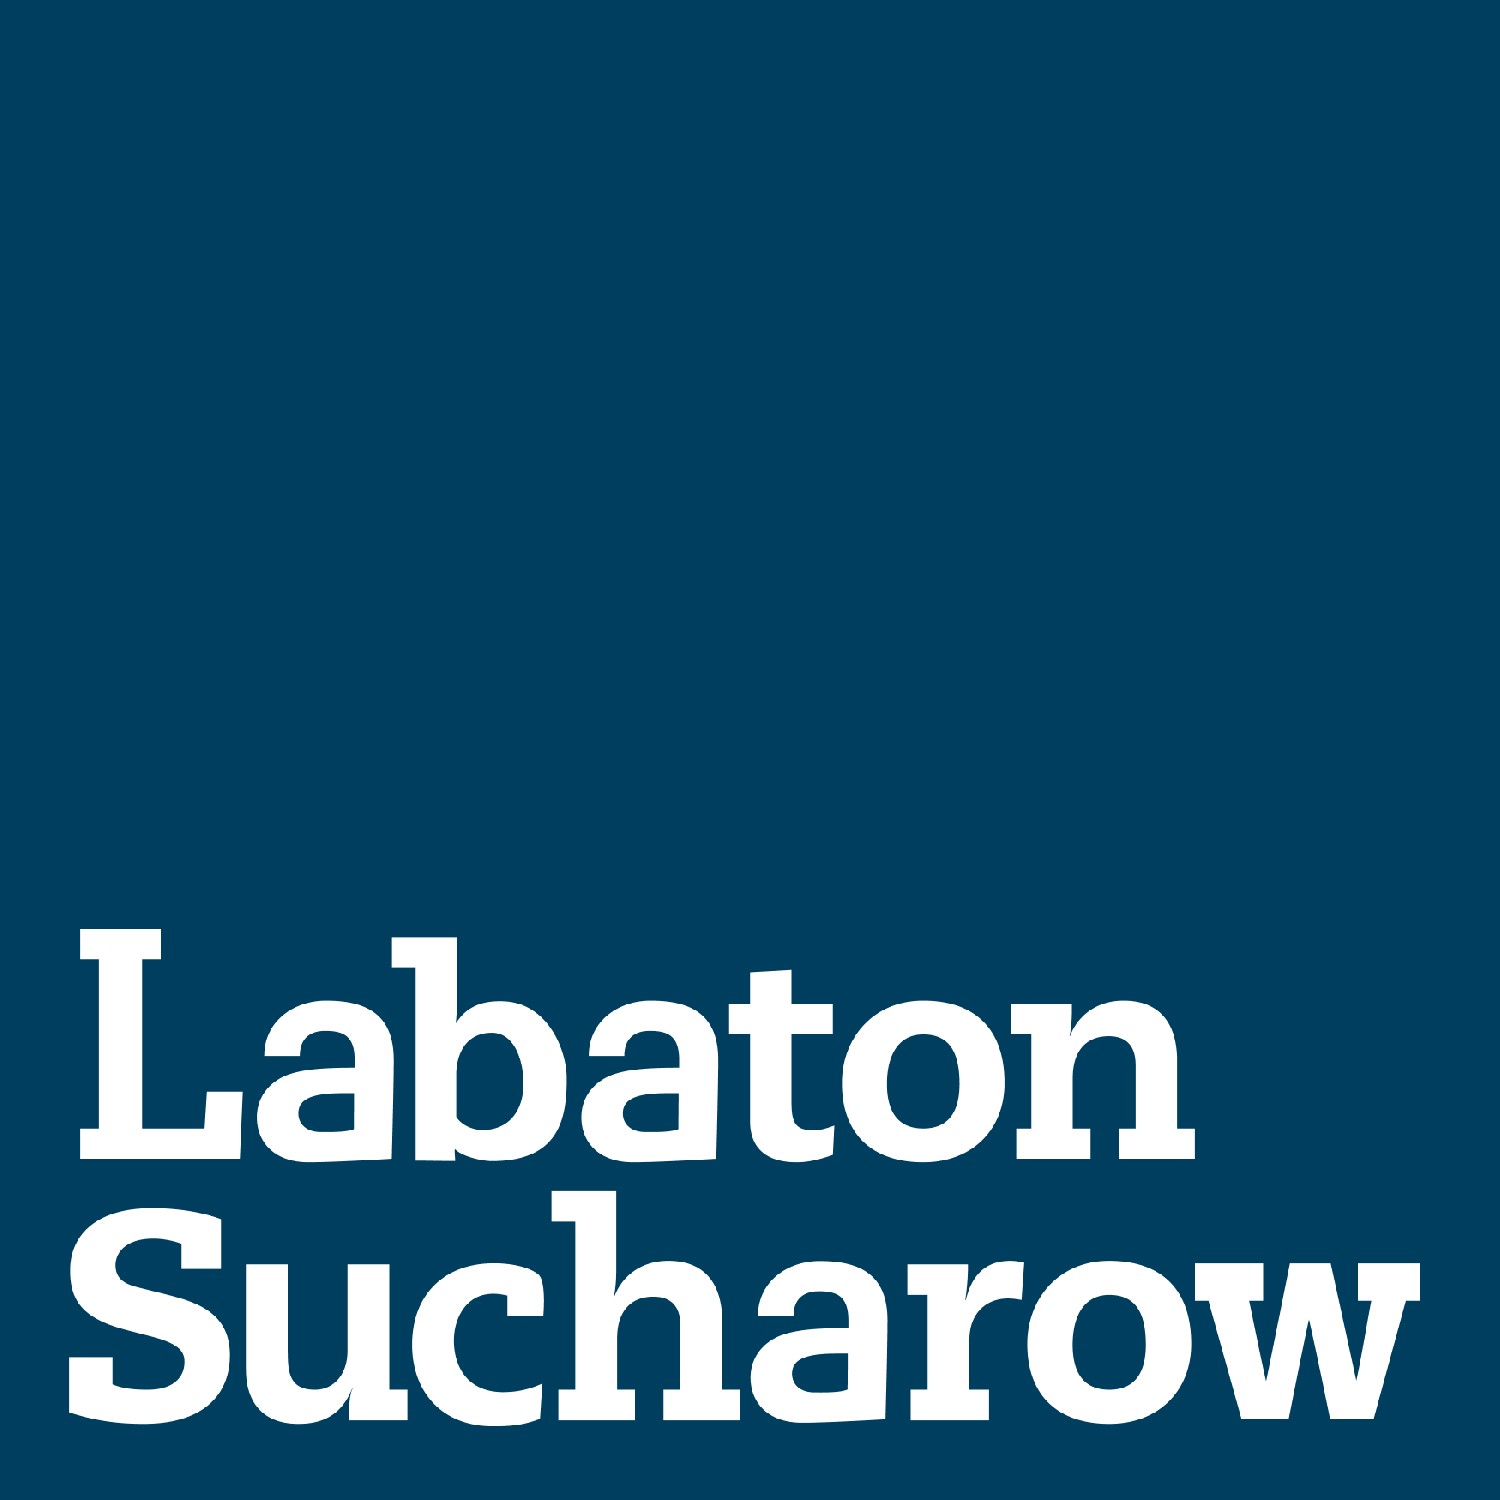 Labaton Sucharow LLP, Friday, May 29, 2020, Press release picture